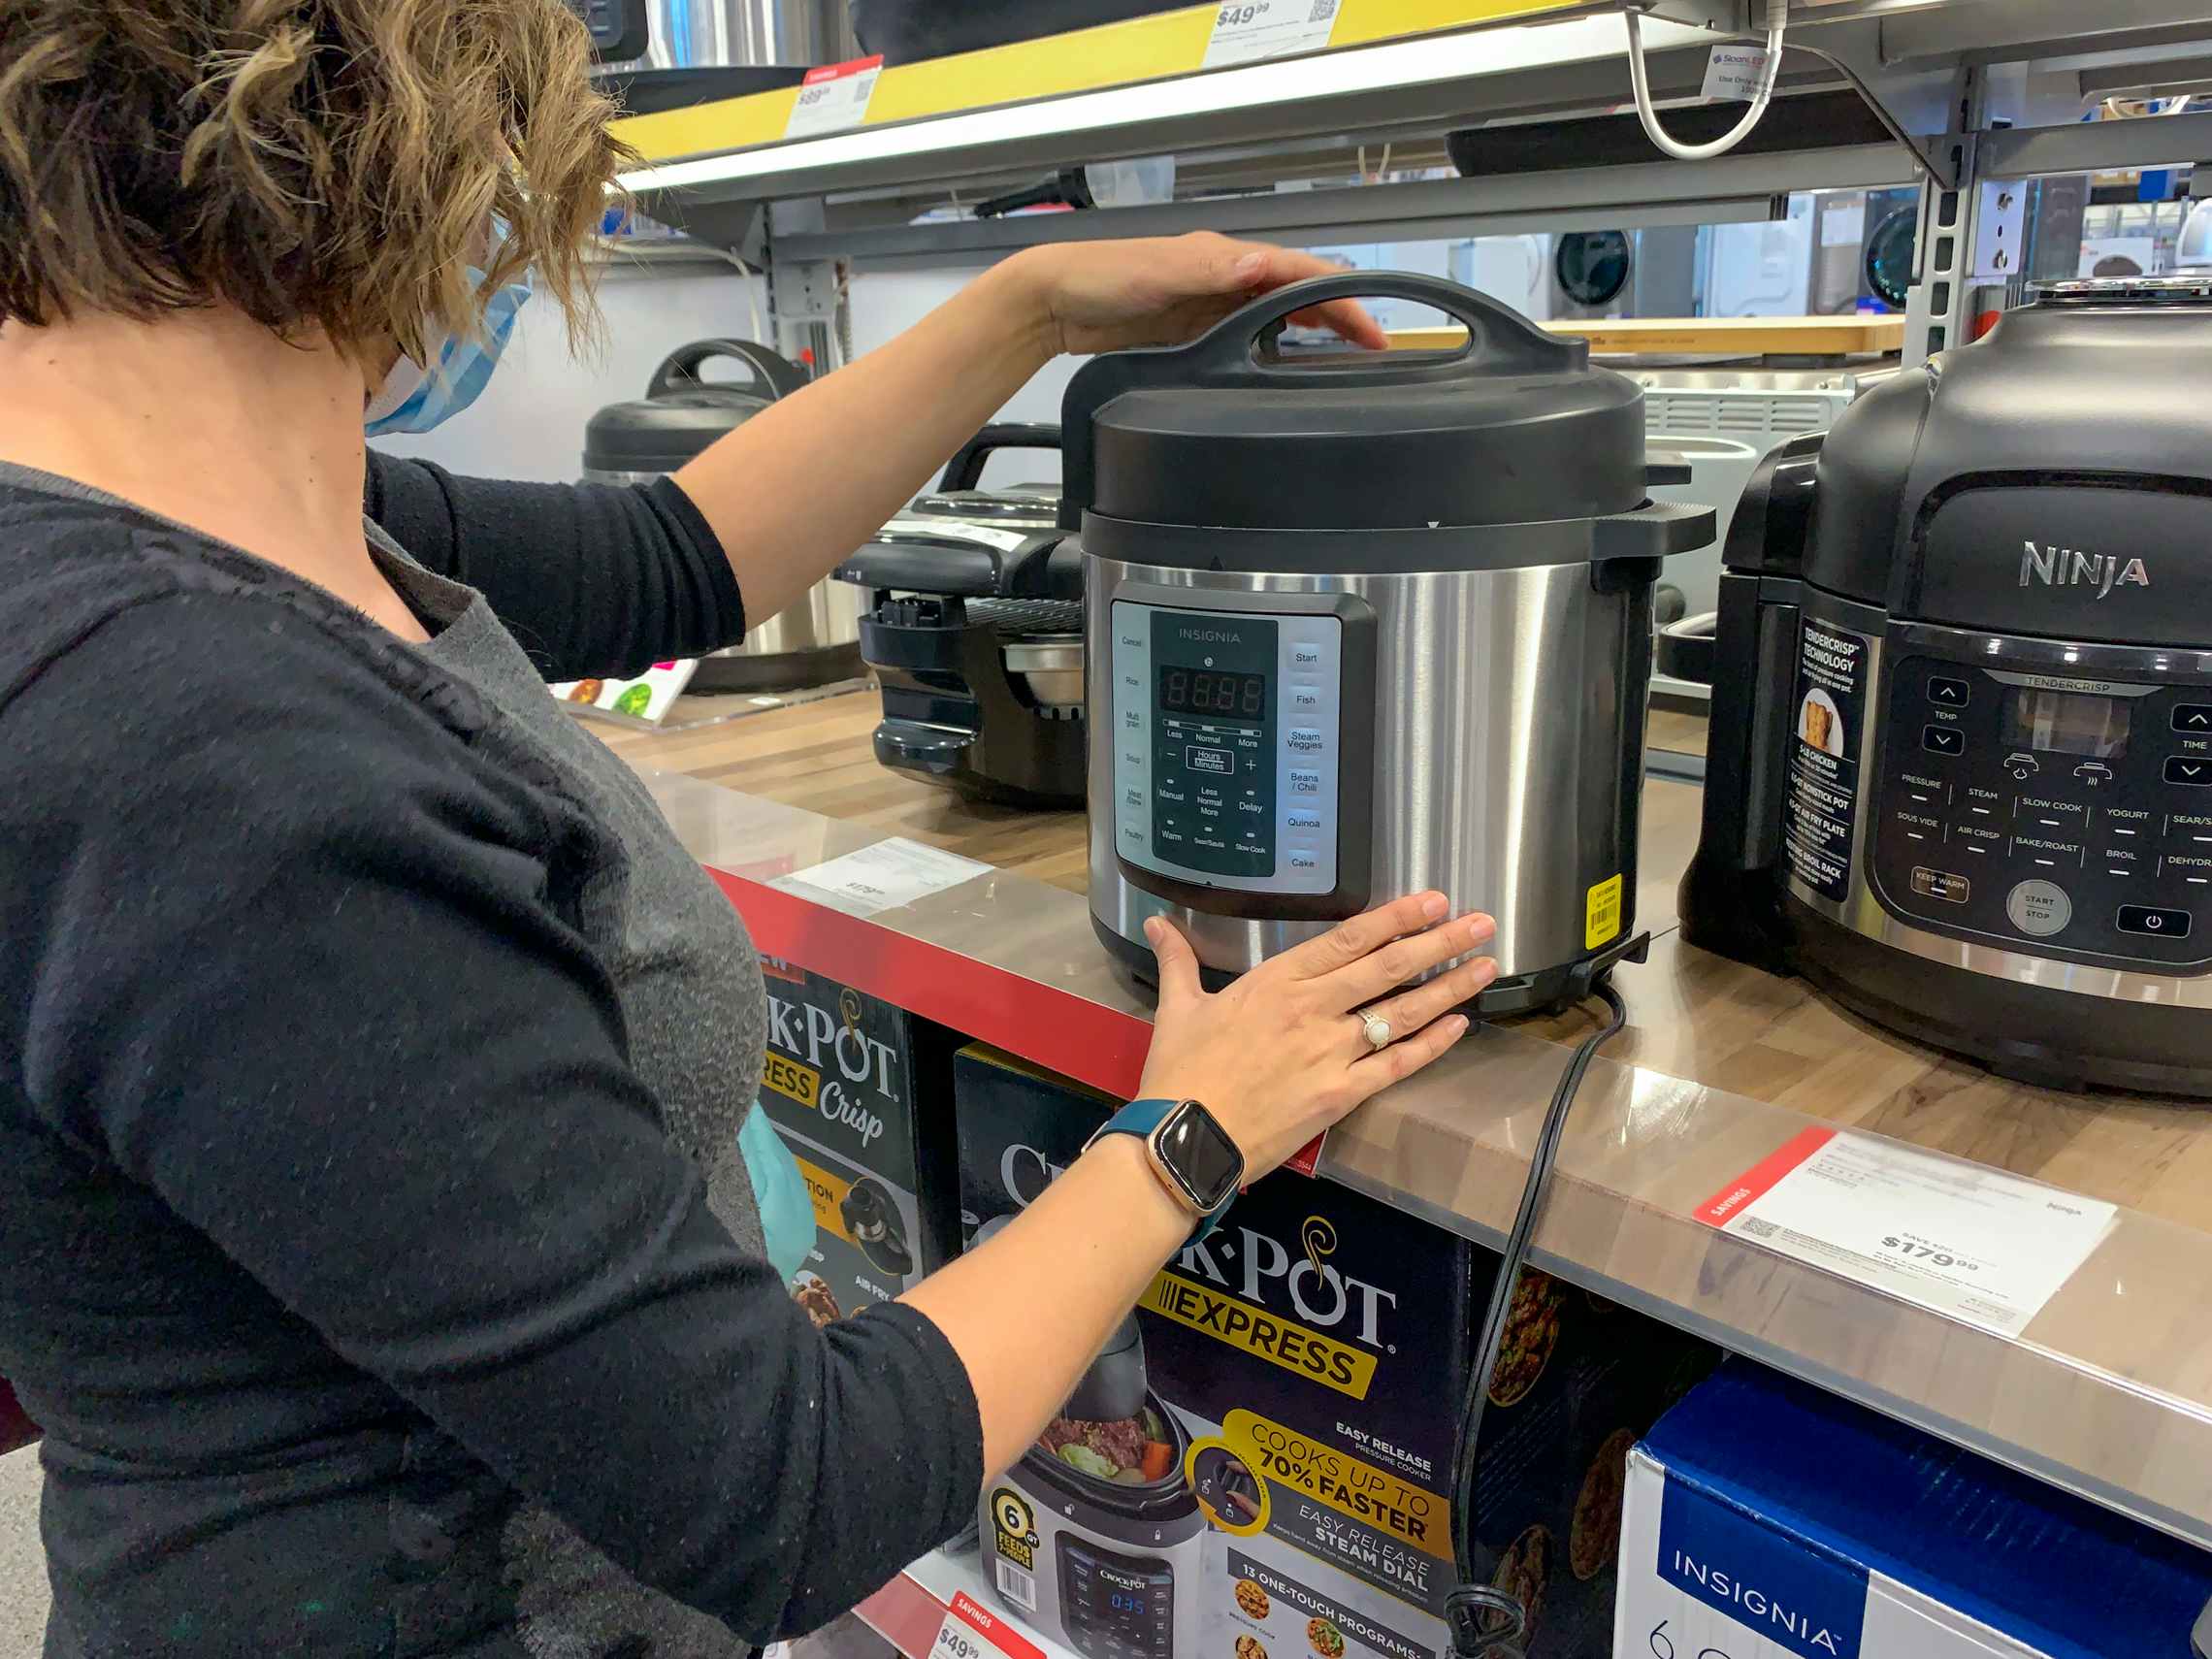 The Instant Pot Viva is on sale for $49.99 — that's over 50% off